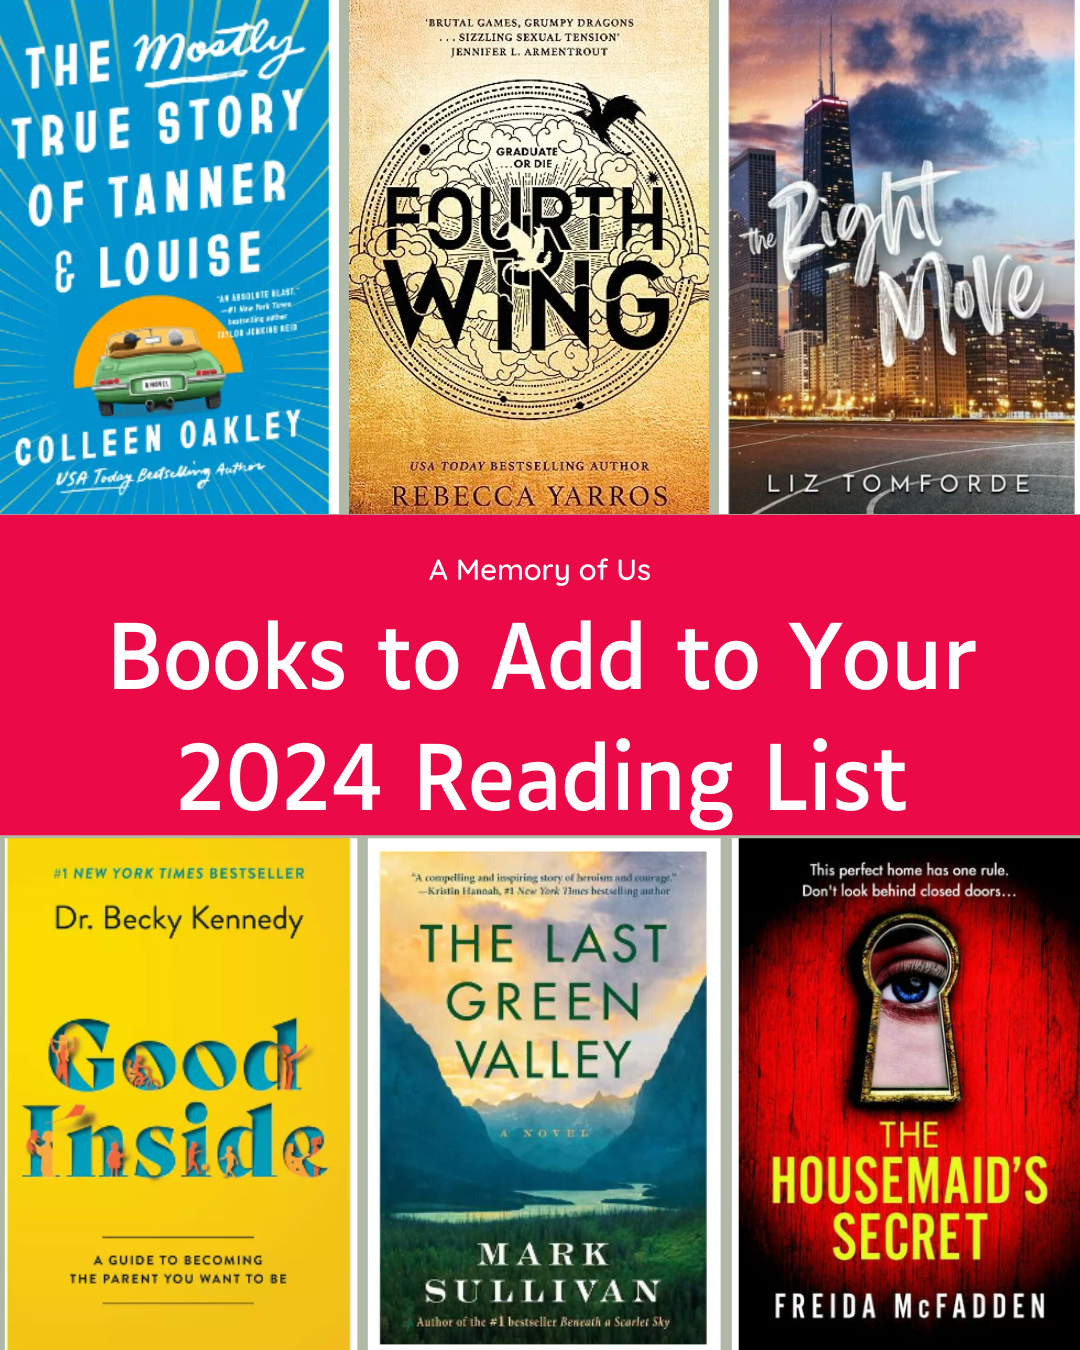 Books to Add to Your 2024 Reading List | Book Recommendations for 2024 |  Best Books from 2023 | What to Read in 2024 | Book Recommendations for Next Year |